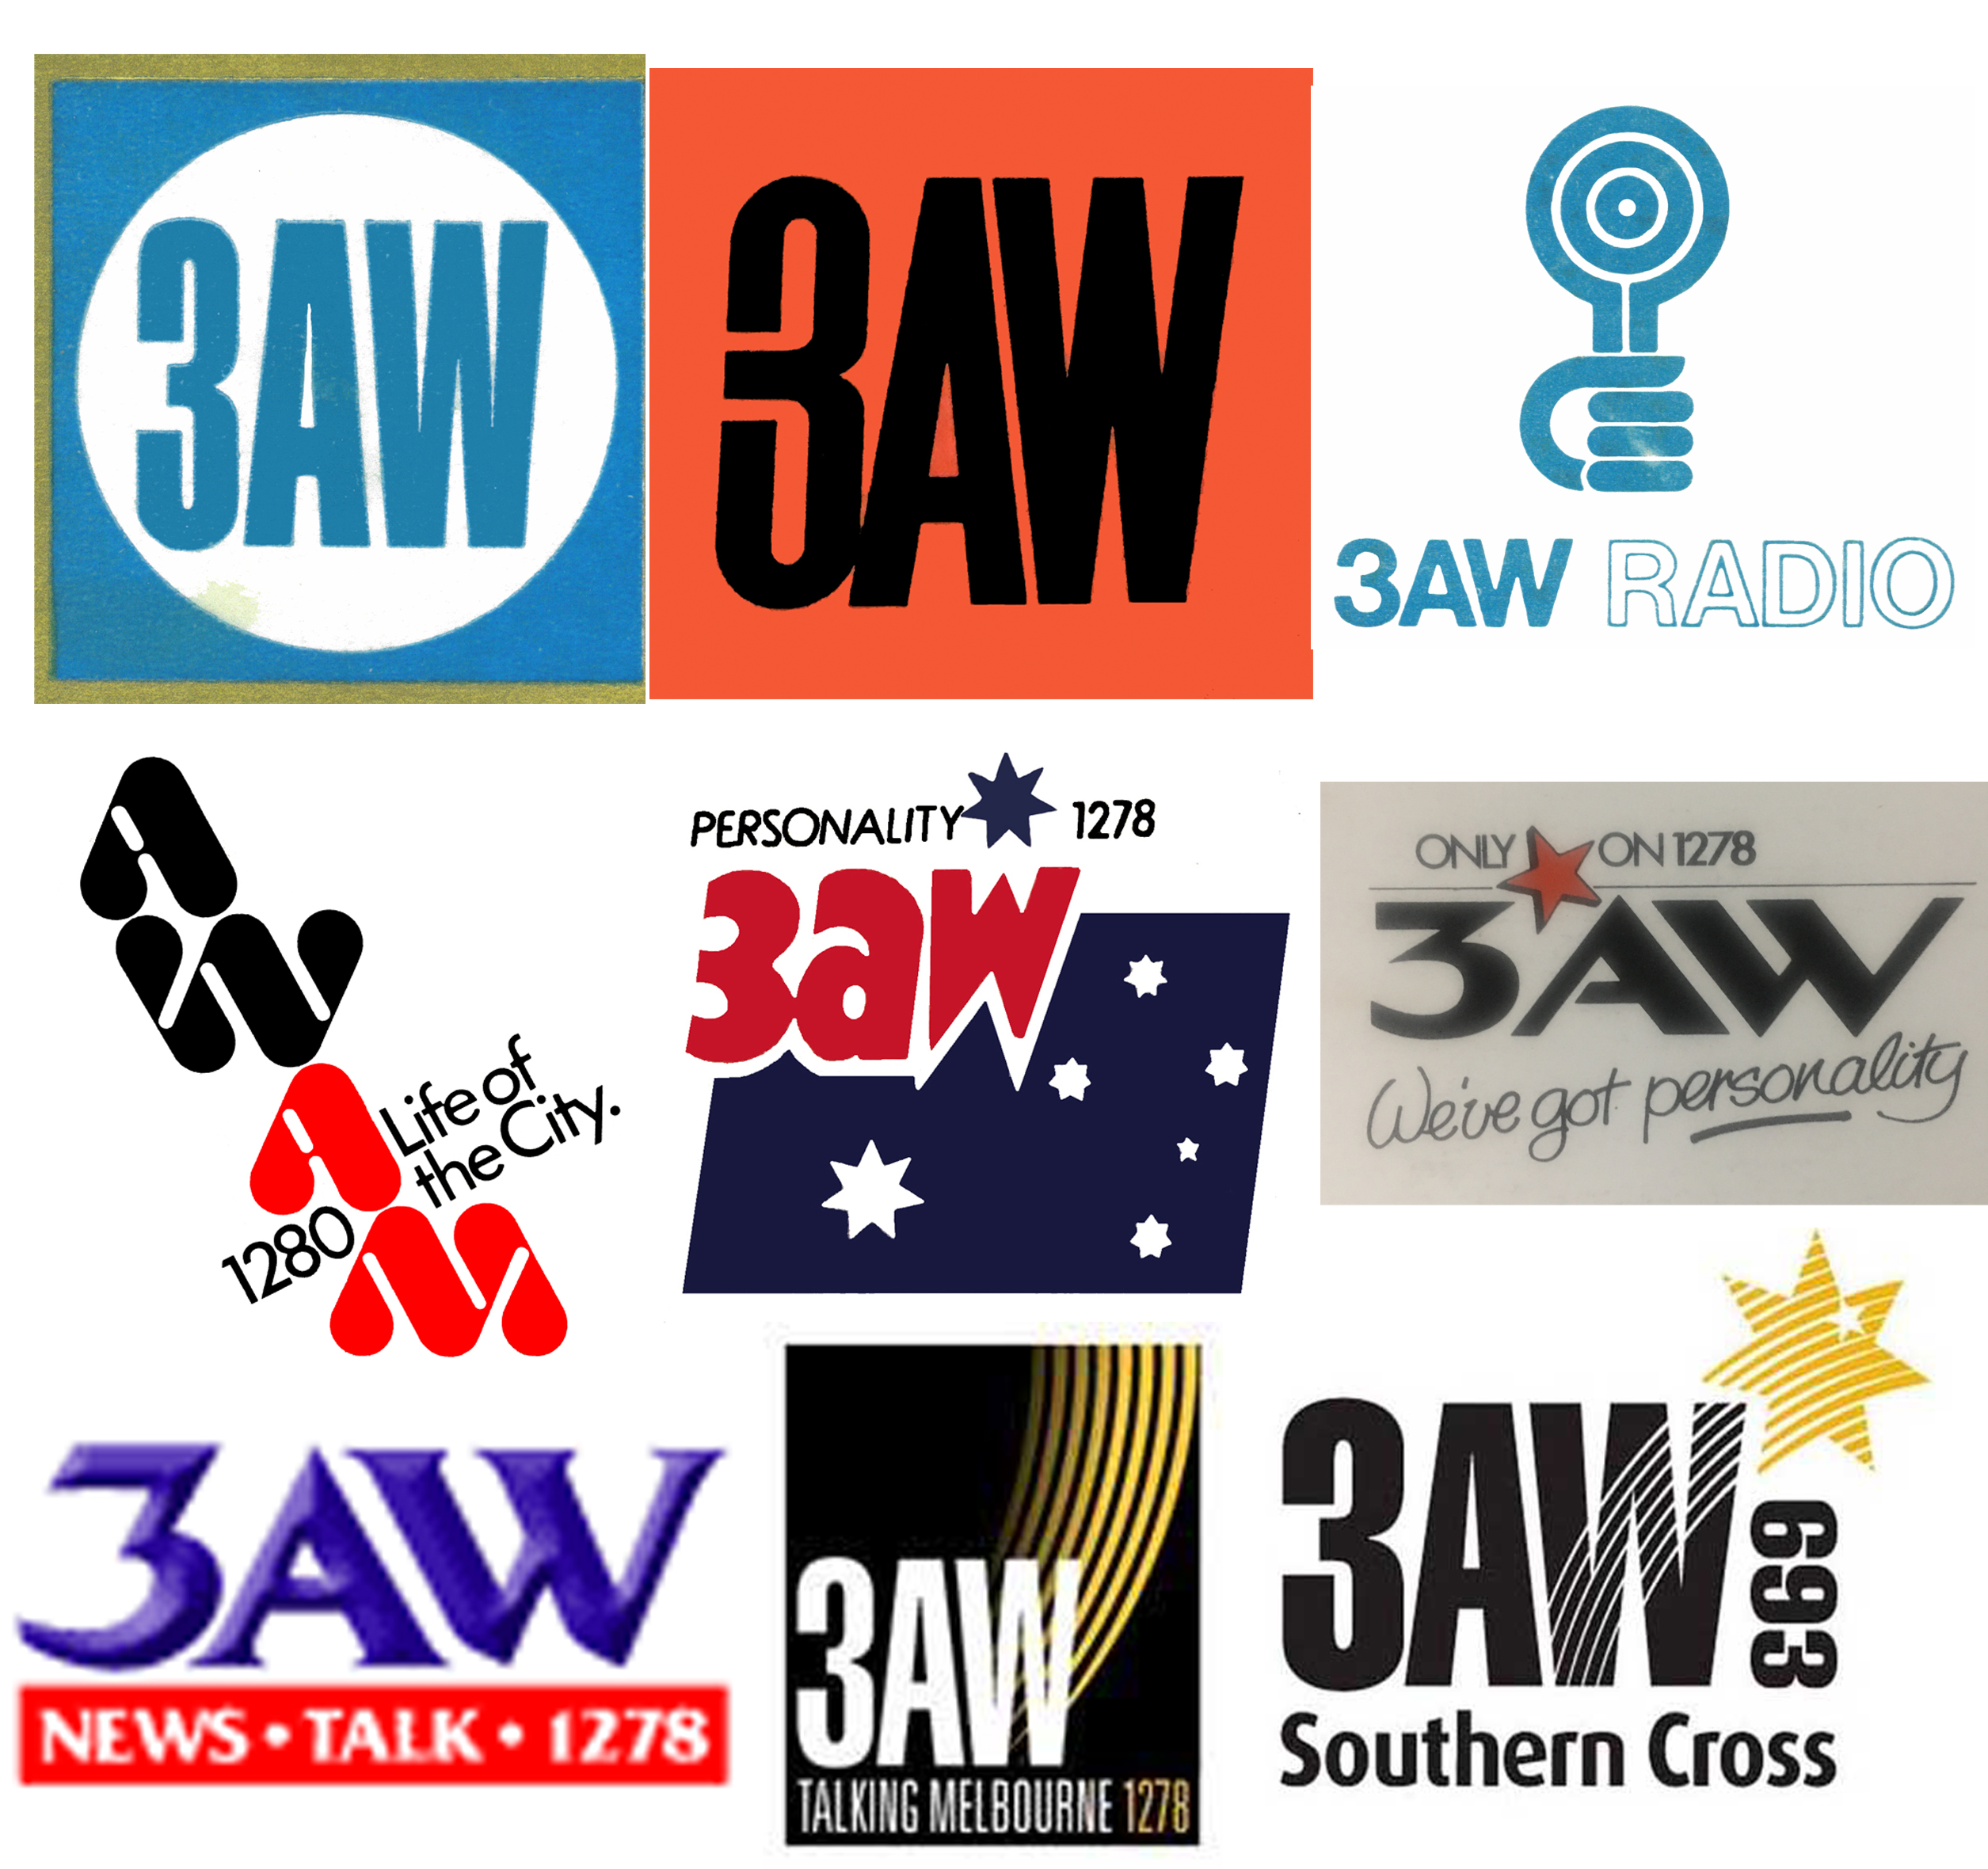 How Malcolm Stuart came to join 3AW